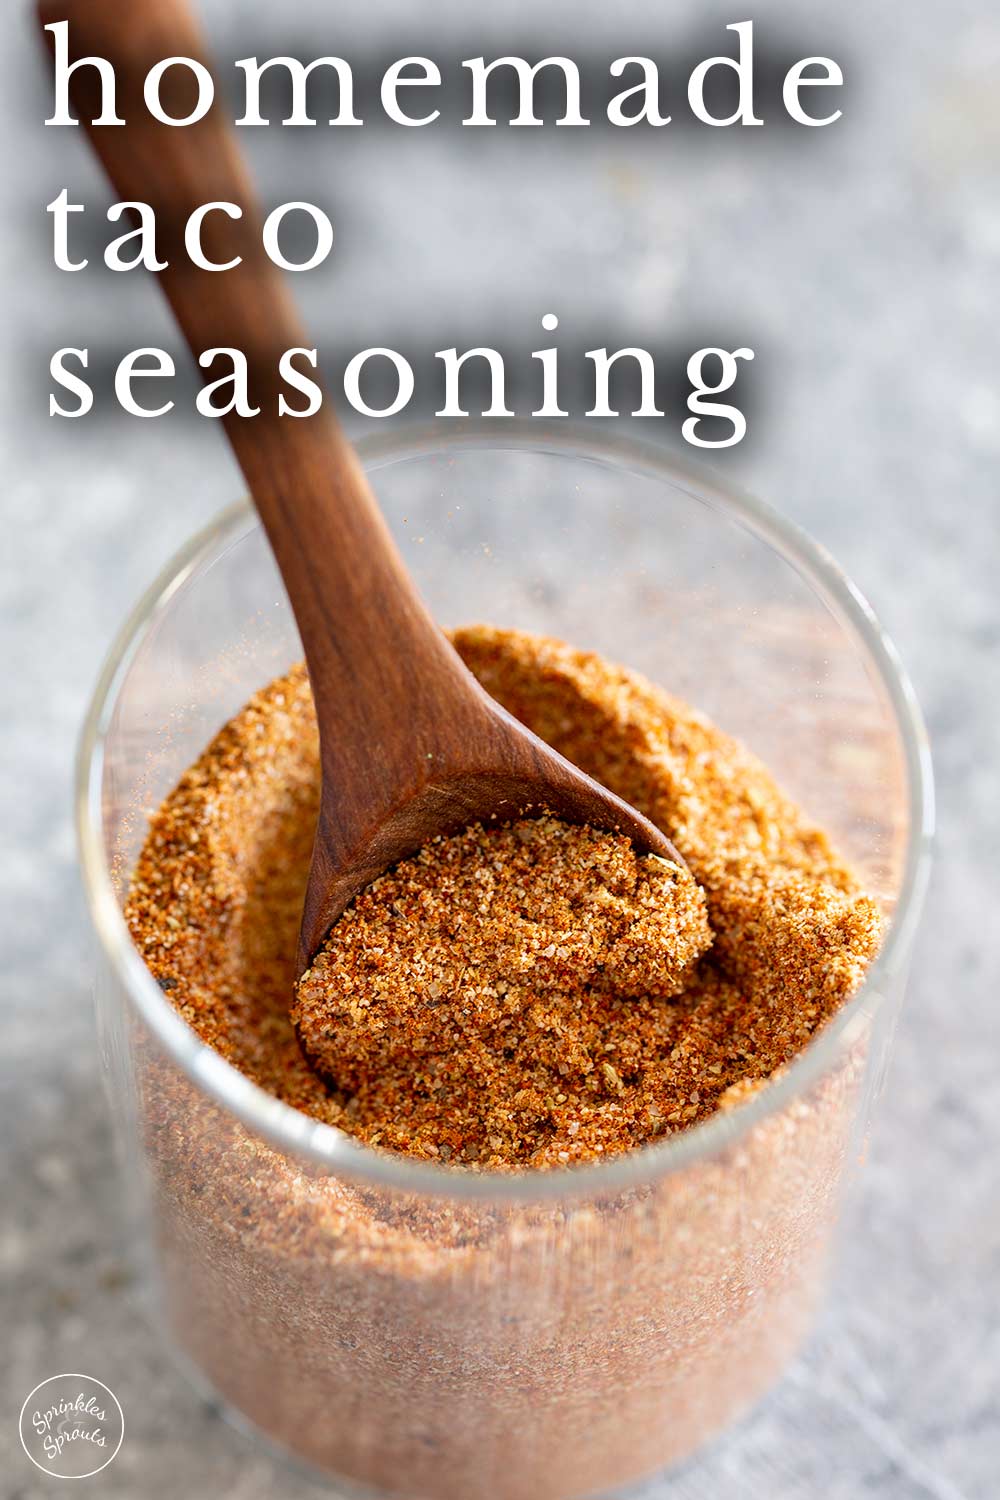 PINTEREST IMAGE - A pot of taco seasoning with text overlay